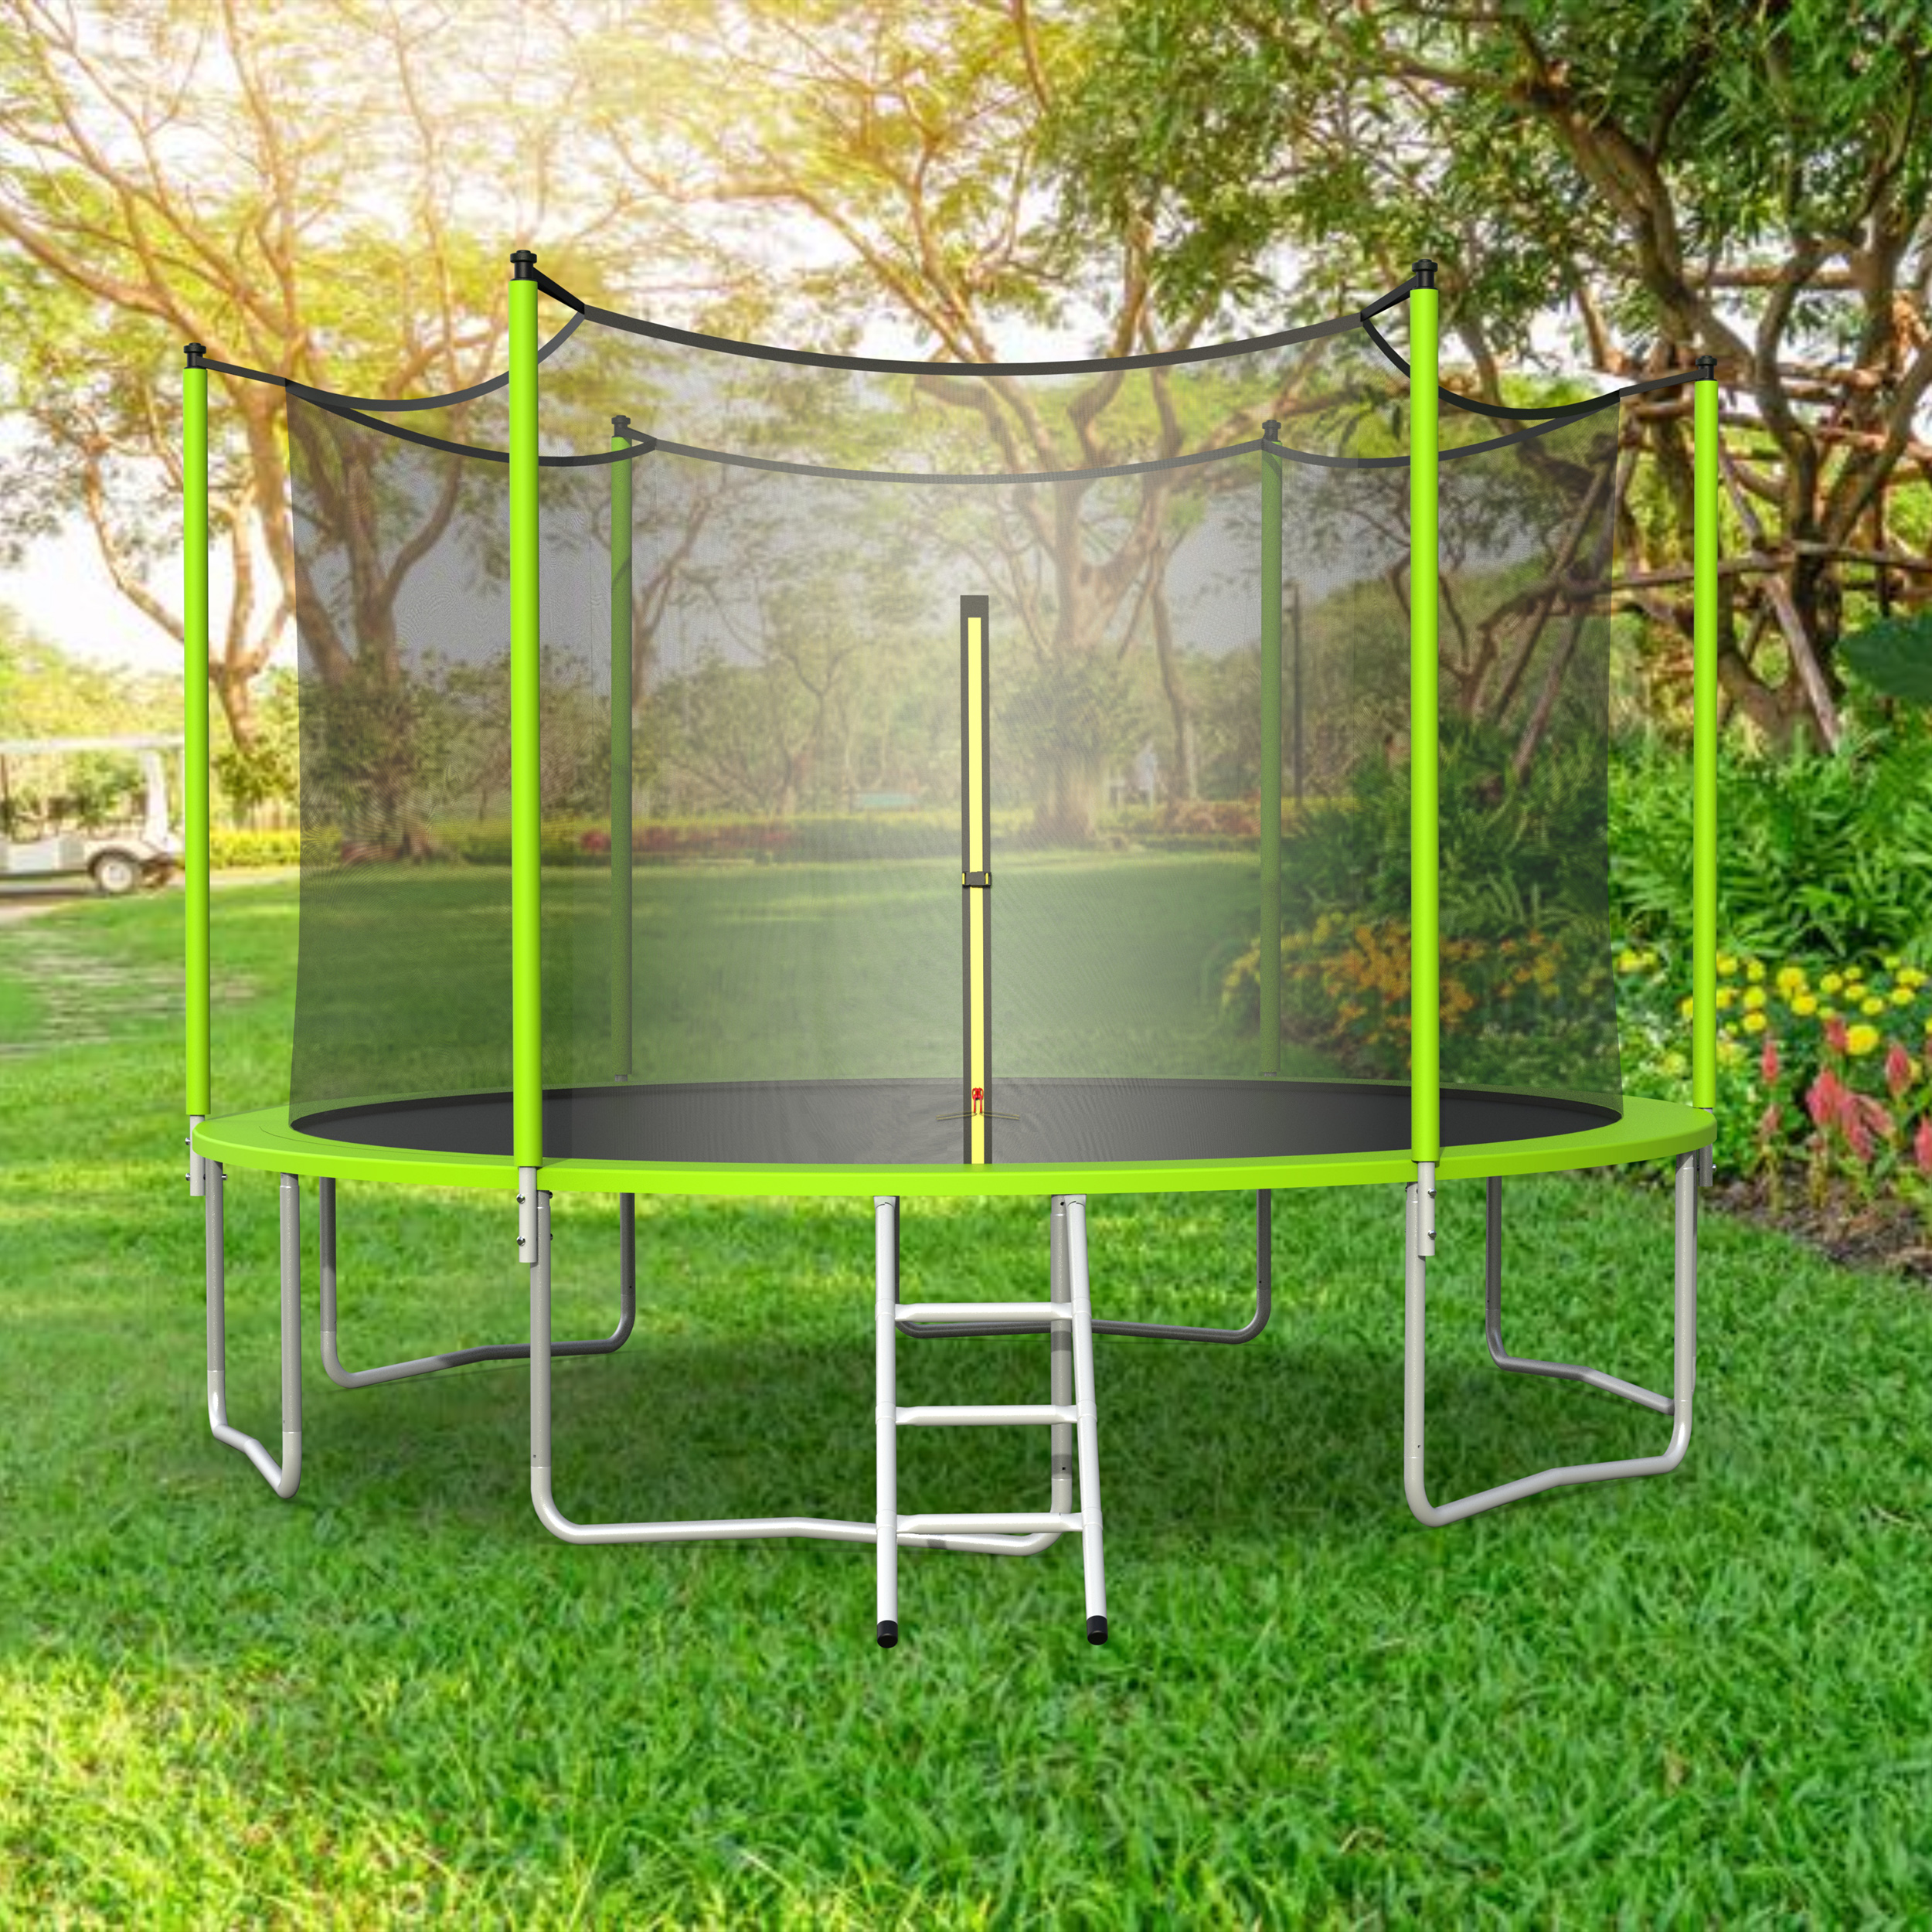 12FT Trampoline with Safety Enclosure Net,Outdoor Fitness Trampoline PVC Spring Cover Padding Exercise Trampoline,Green-CASAINC